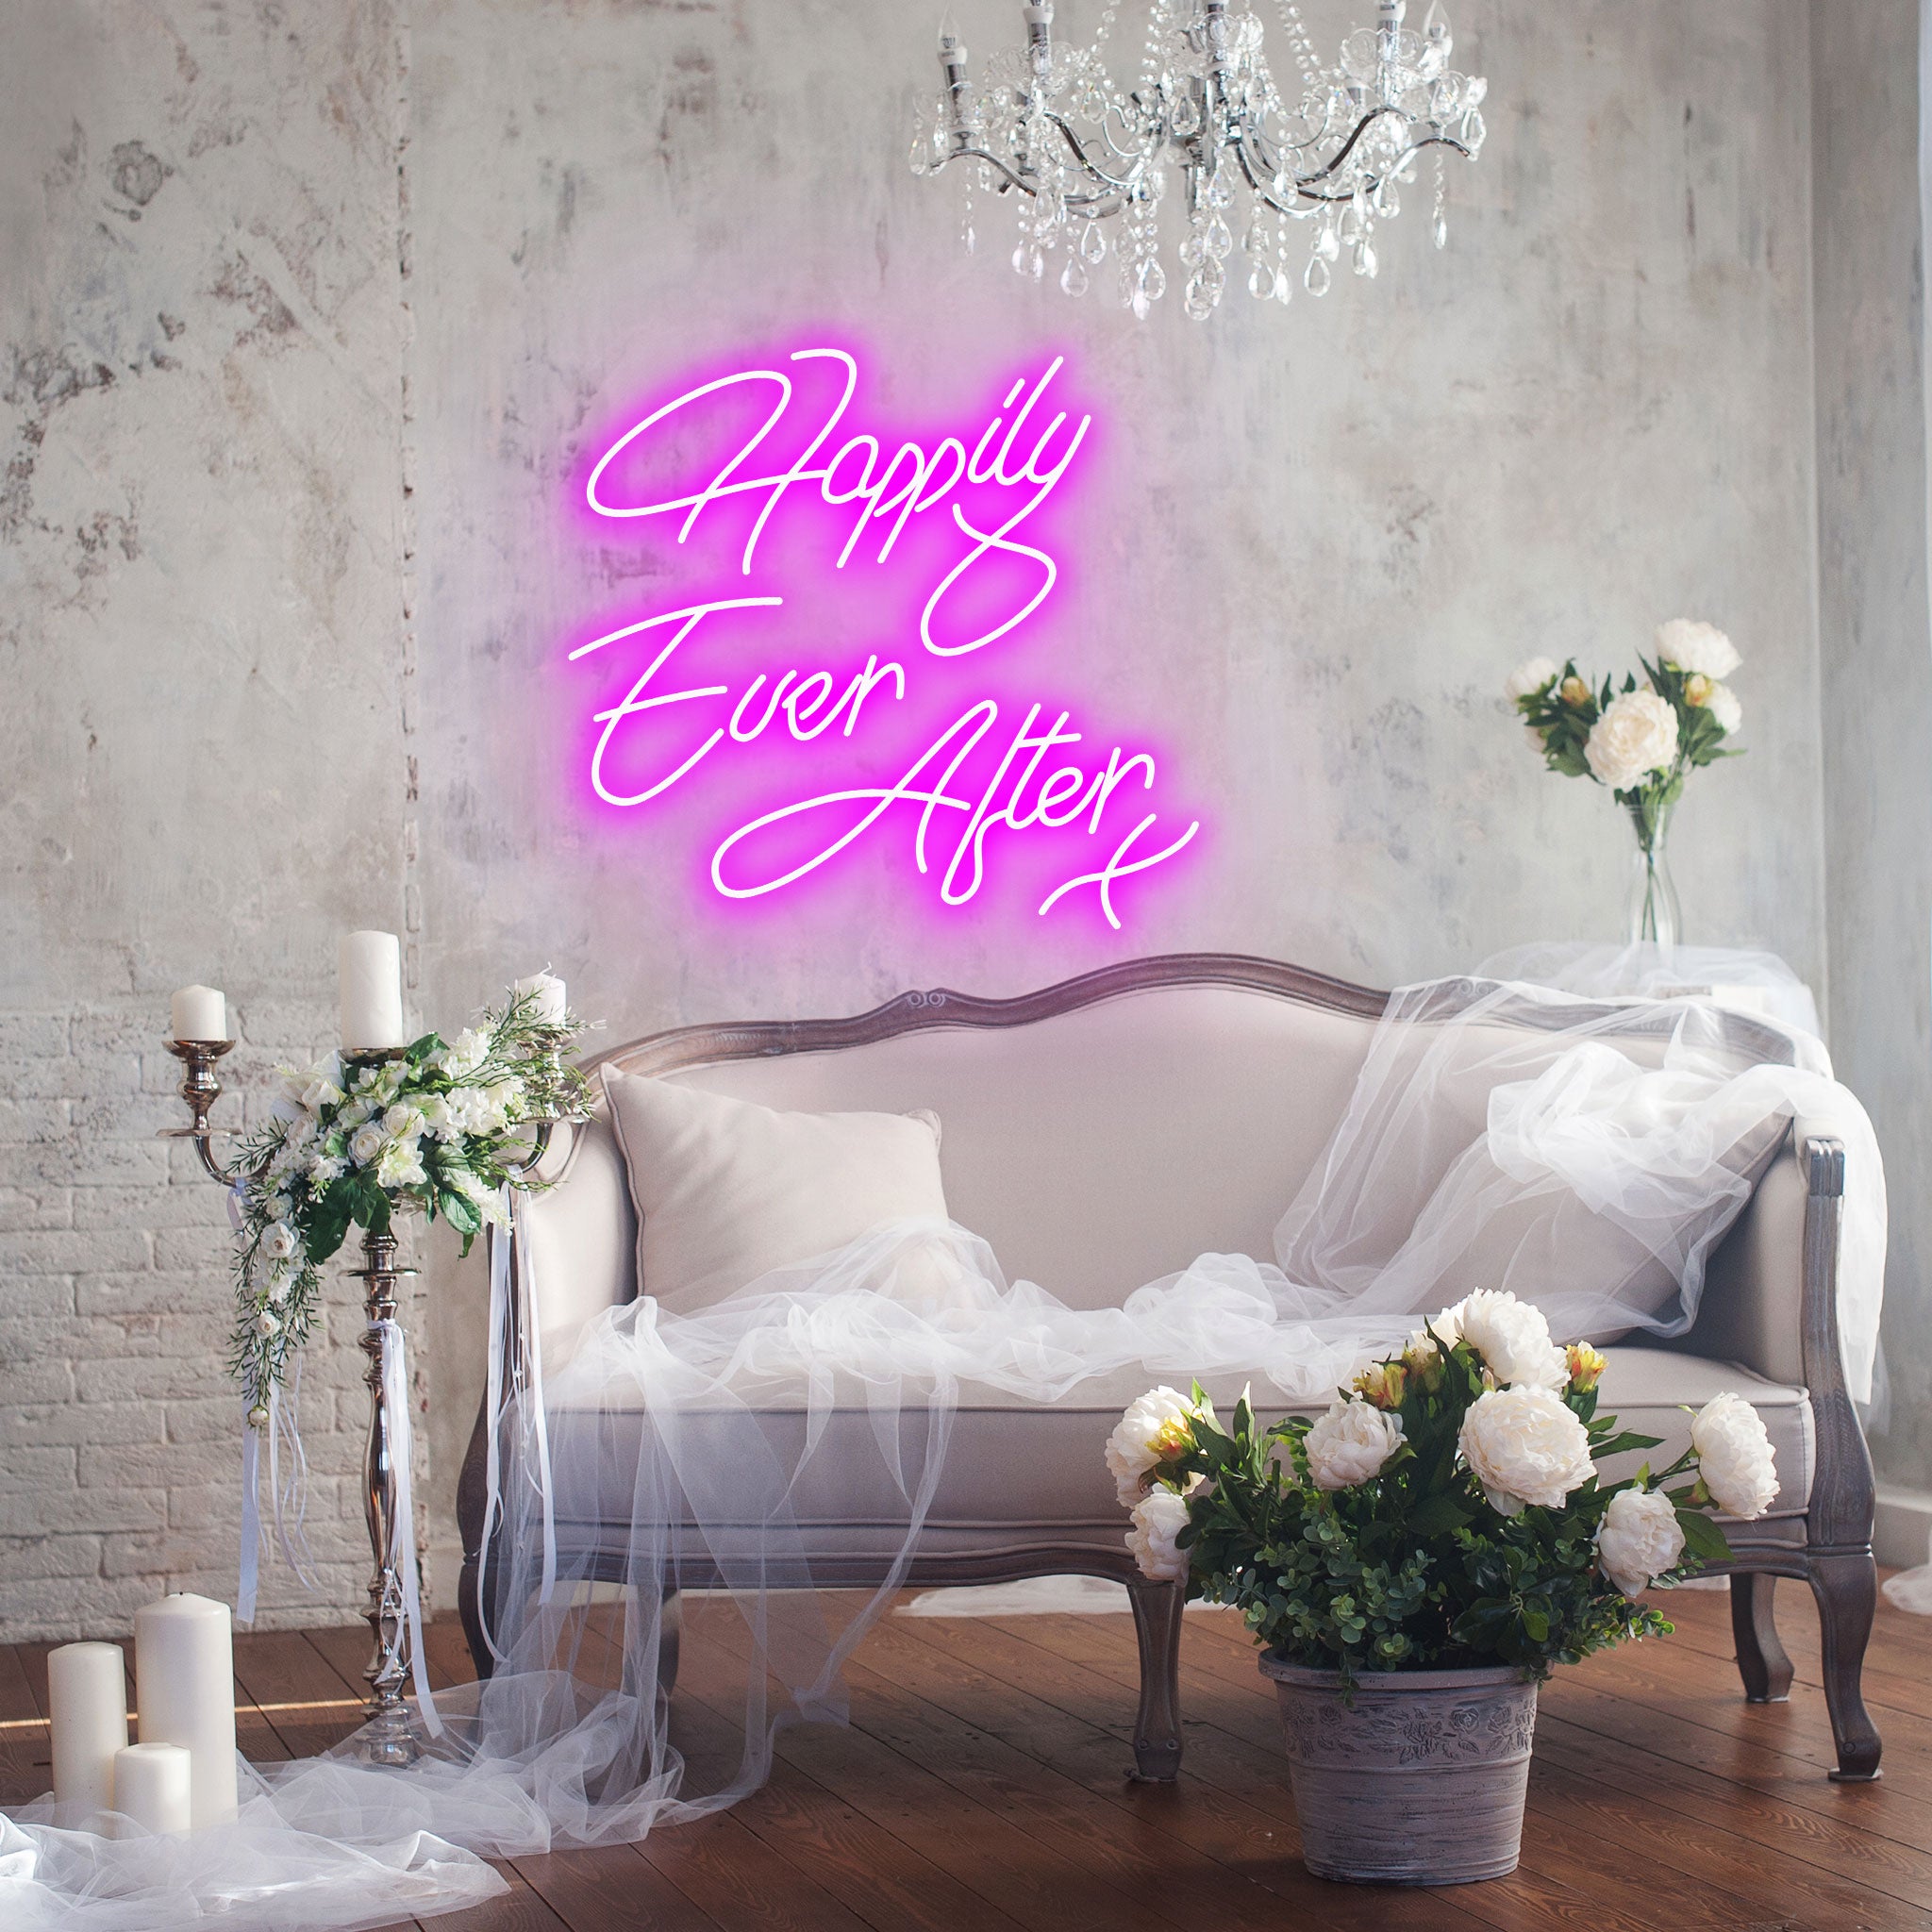 Happily Ever After - Neon Sign - Wedding Engagement Event